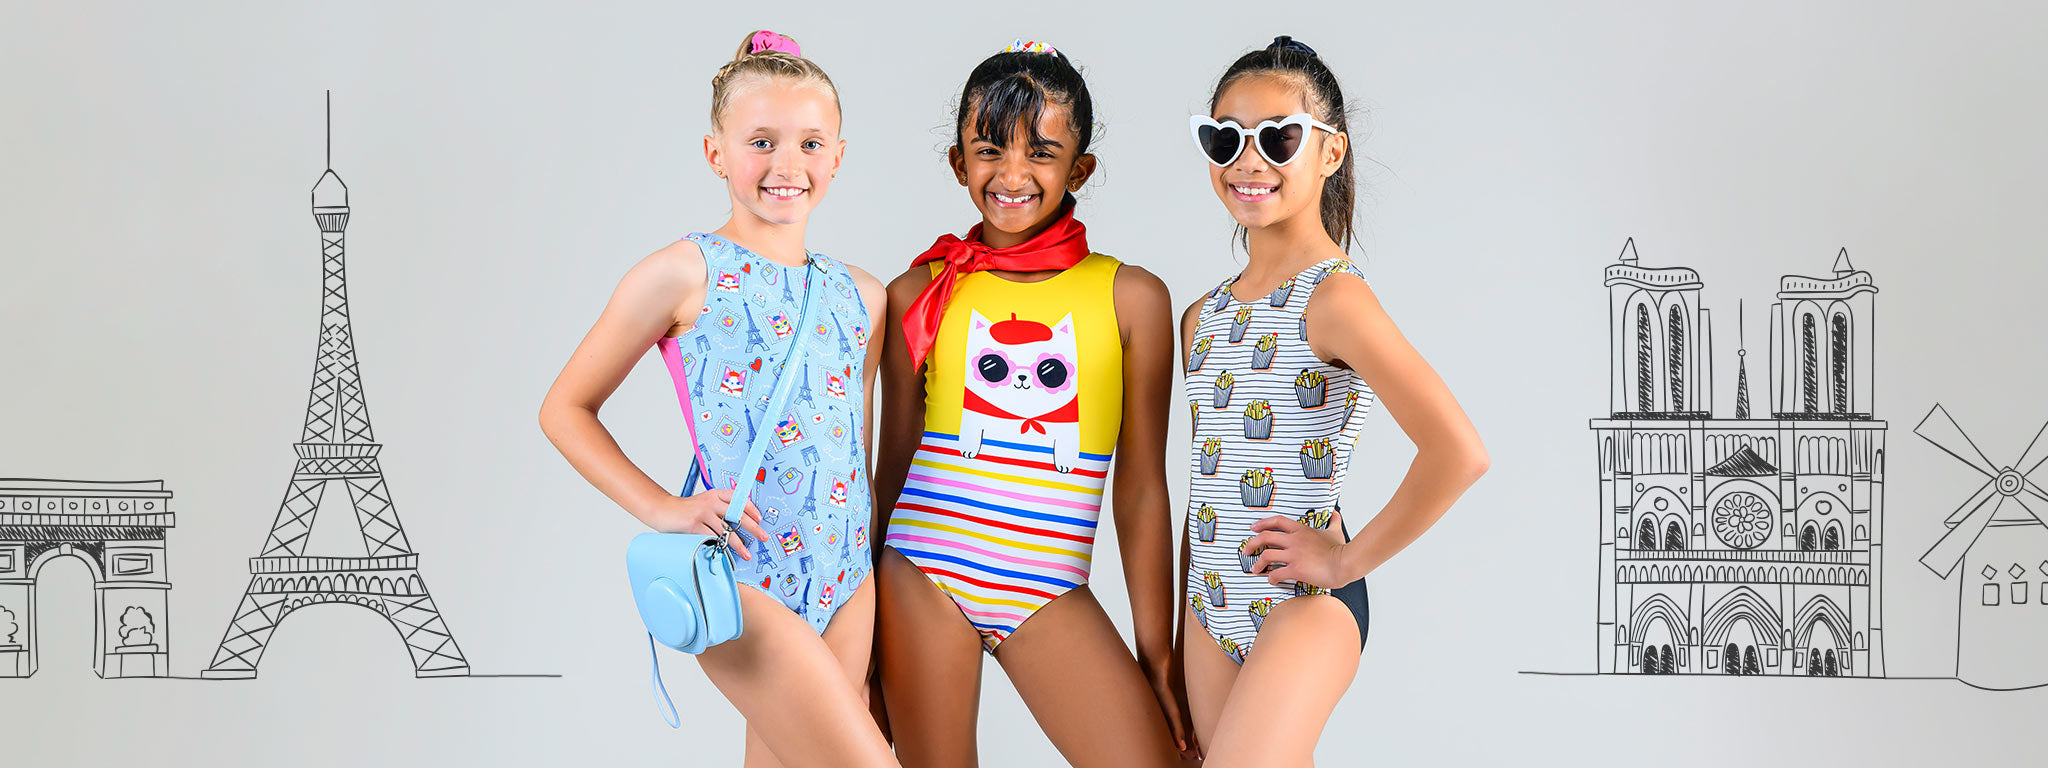 New Arrivals: Exclusive Paris Leotards for the Summer Games by Destira, 2024